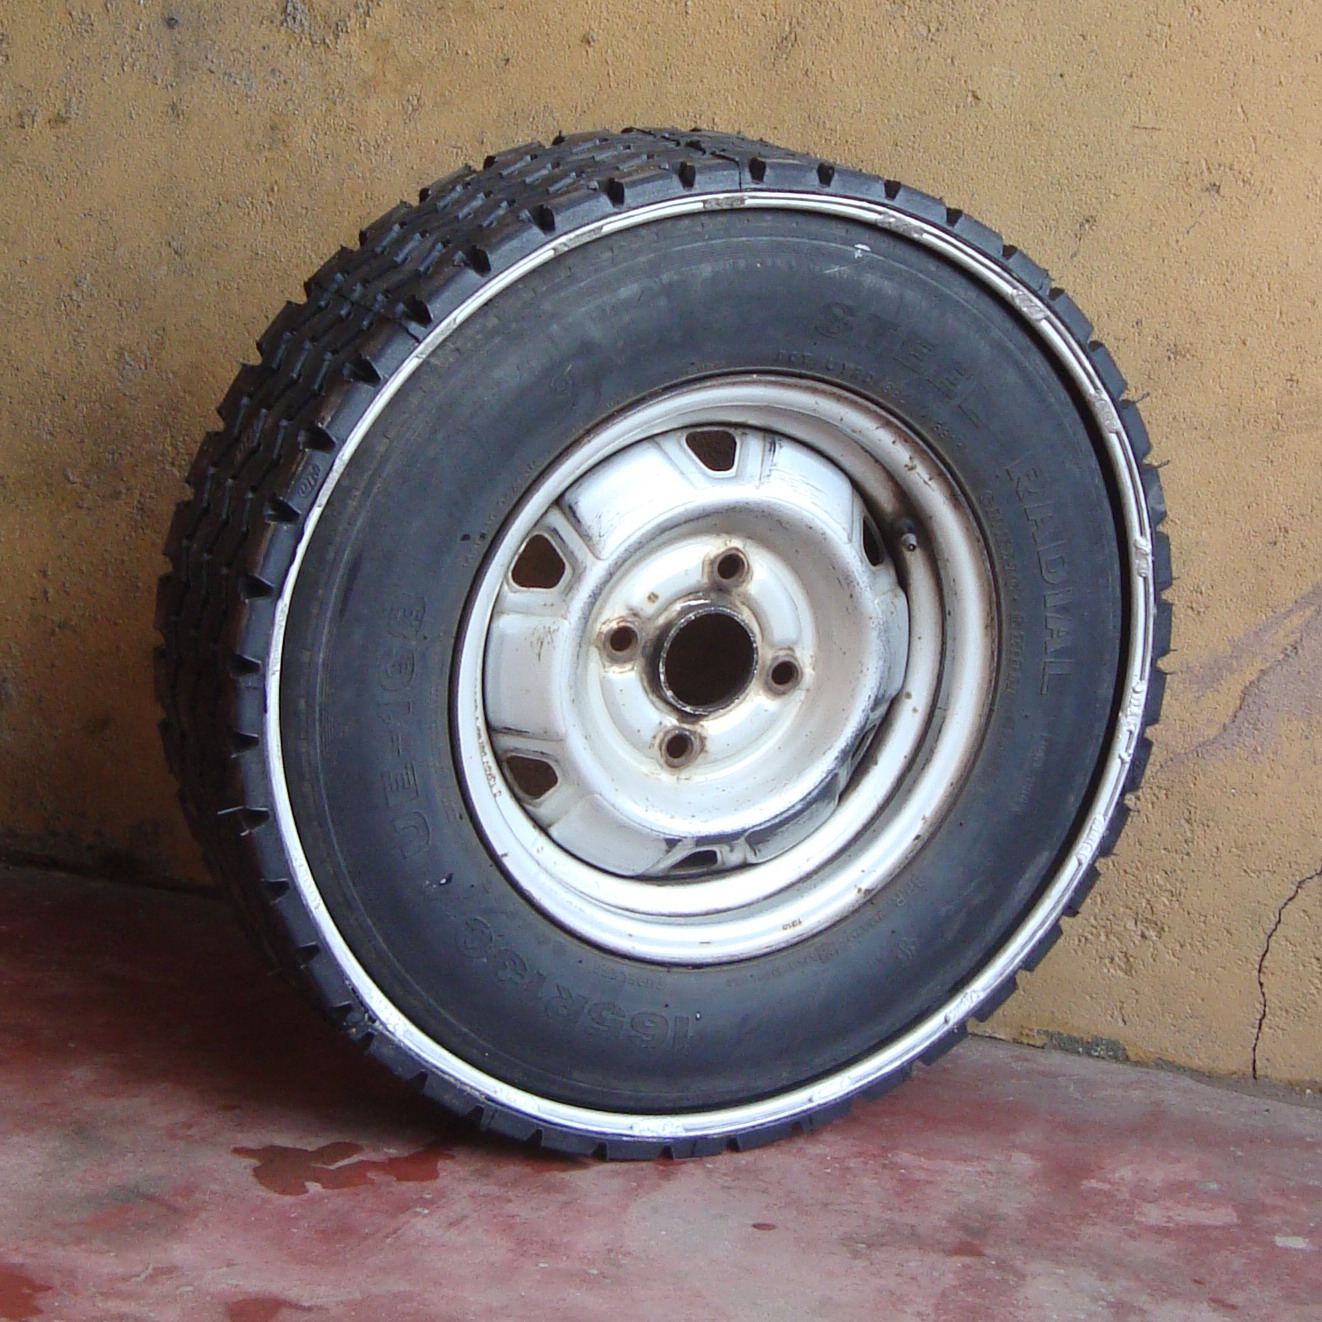 Tire and rim assembly